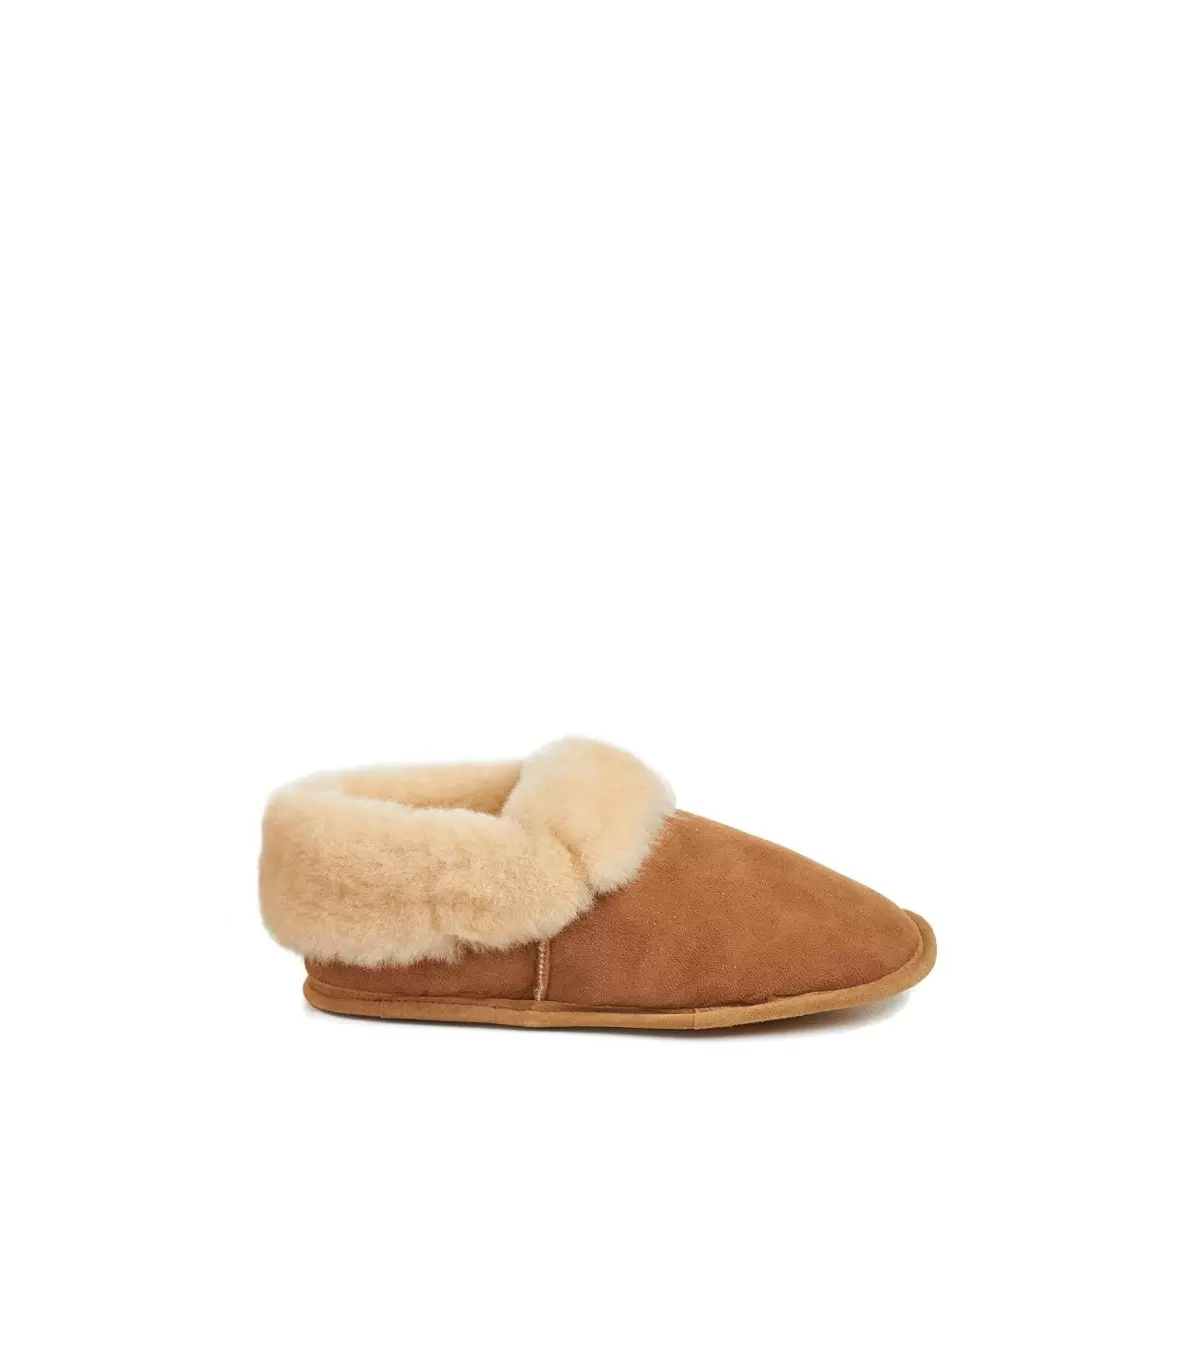 Womens Sheepskin Moccasin Slippers Soft Suede Leather Sole - Etsy